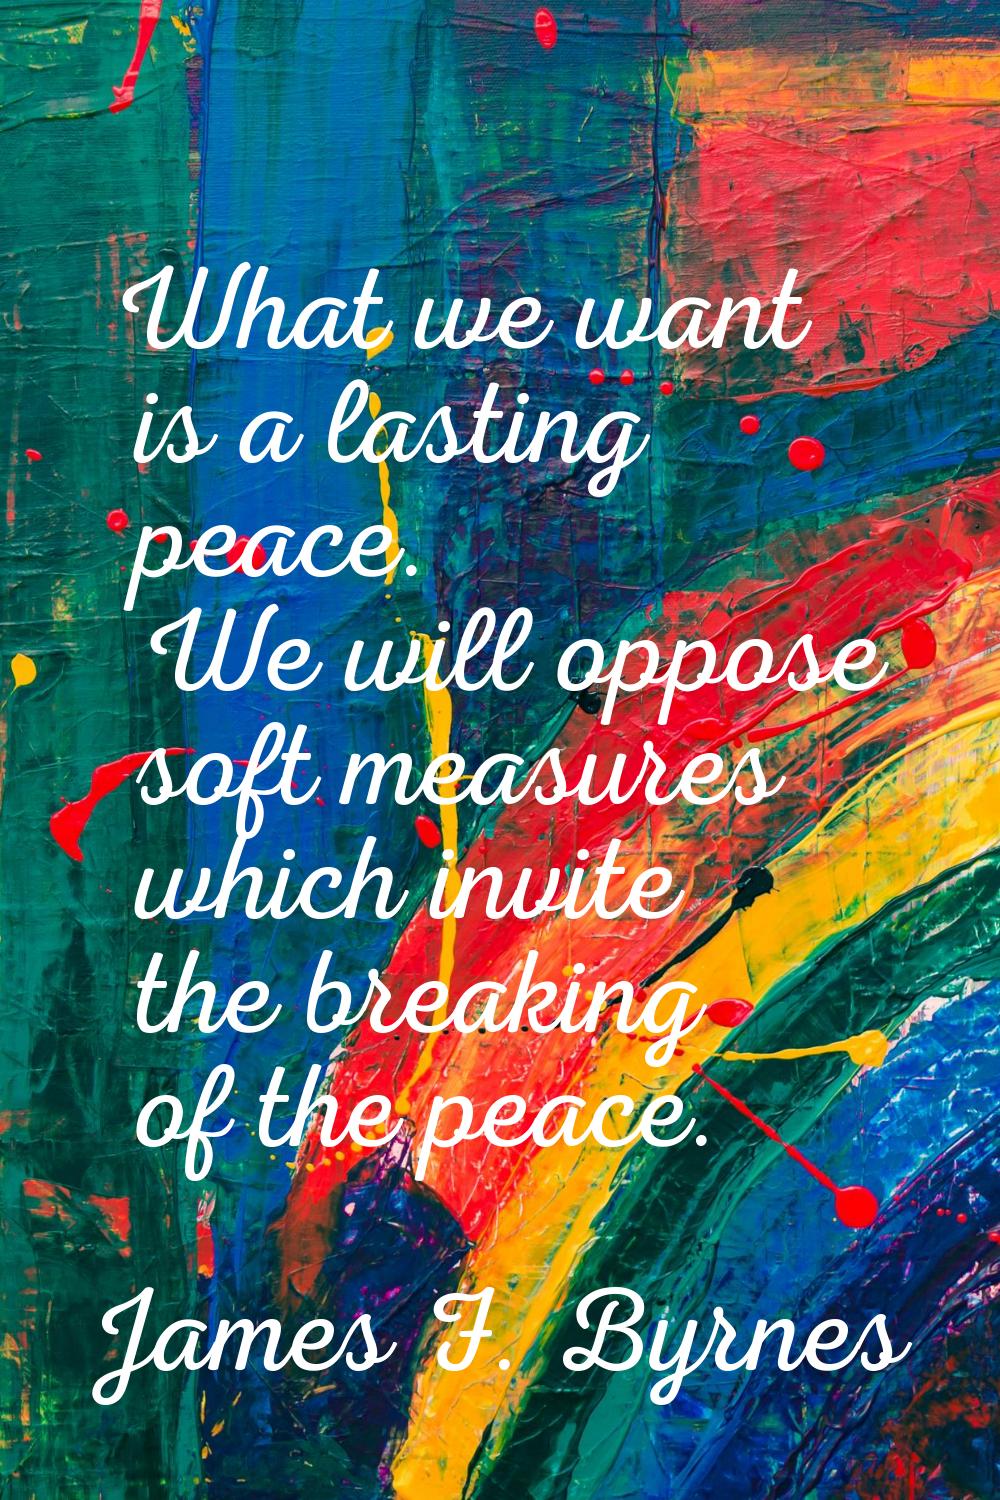 What we want is a lasting peace. We will oppose soft measures which invite the breaking of the peac